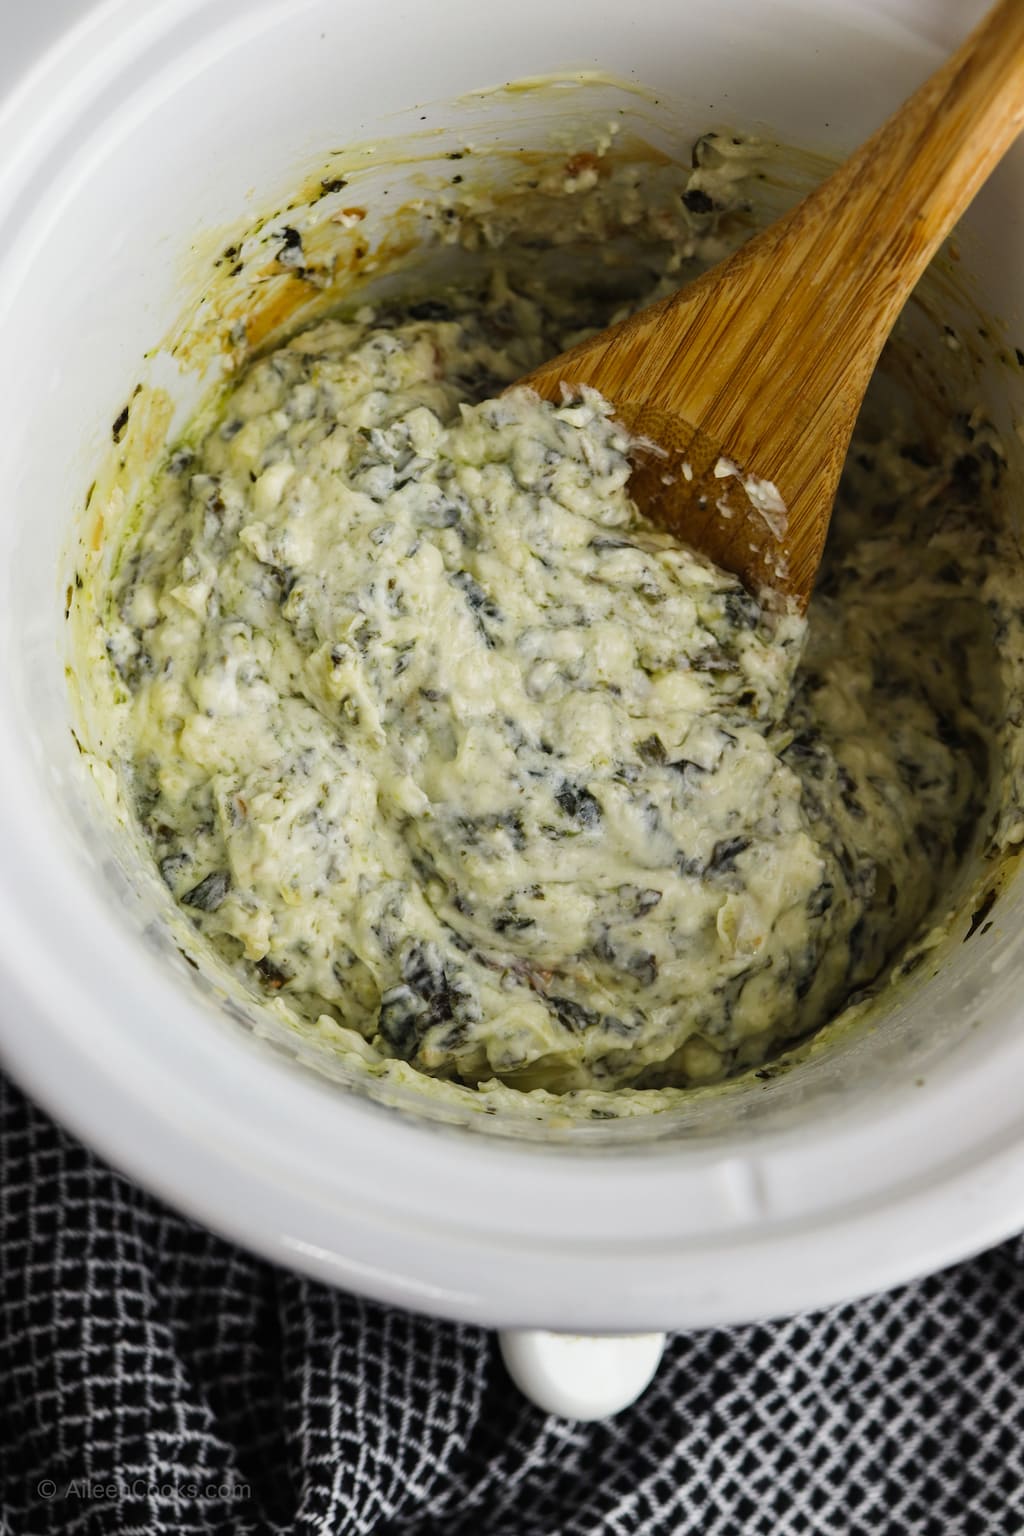 A wooden spoon mixing up the ingredients for spinach artichoke dip.